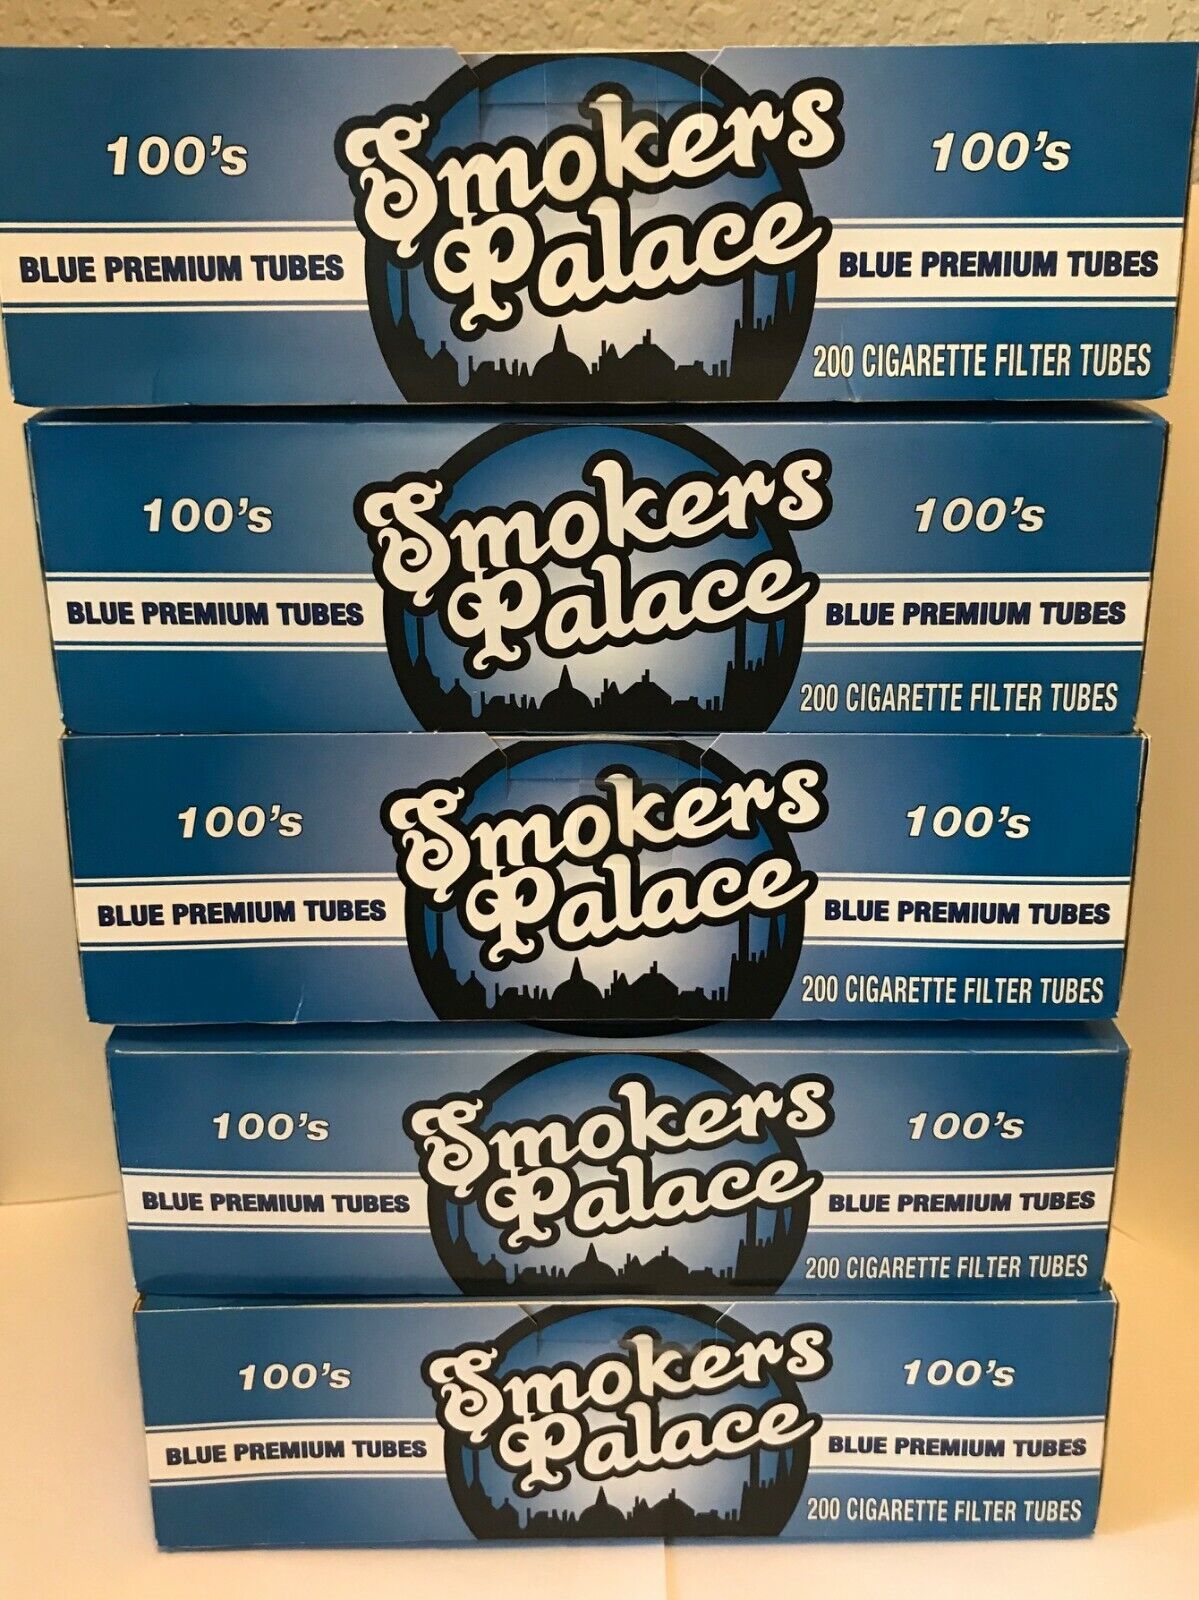 Smokers Palace Blue 100's Size-5 Boxes Tubes 200 Cigarette Filter Premium Tubes.